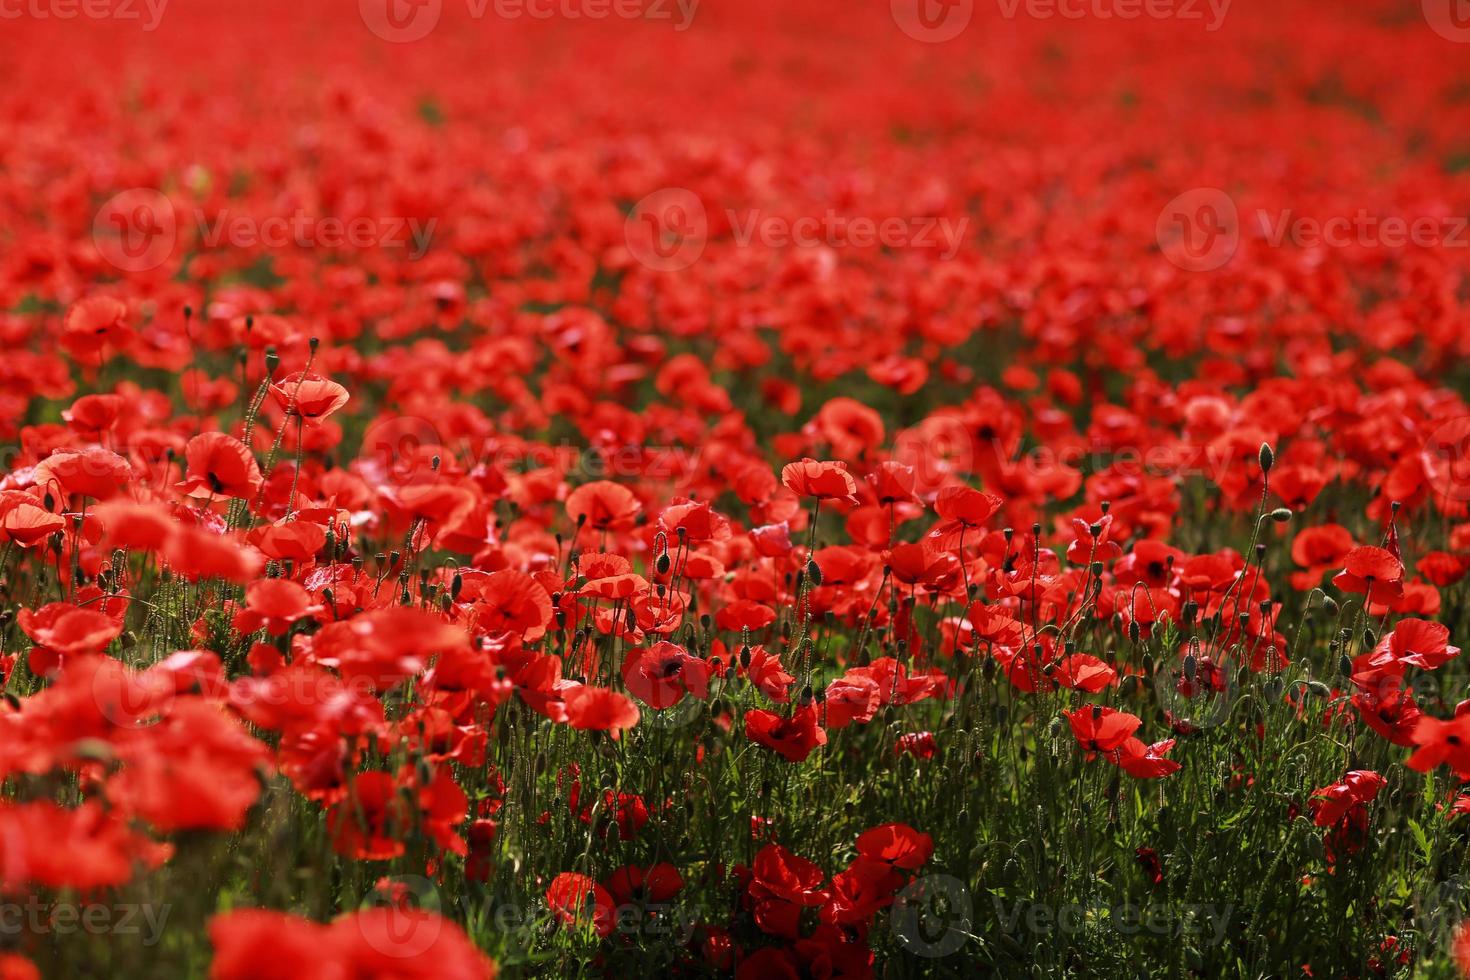 picturesque scene. close up fresh, red flowers poppy on the green field, in the sunlight. majestic rural landscape. photo